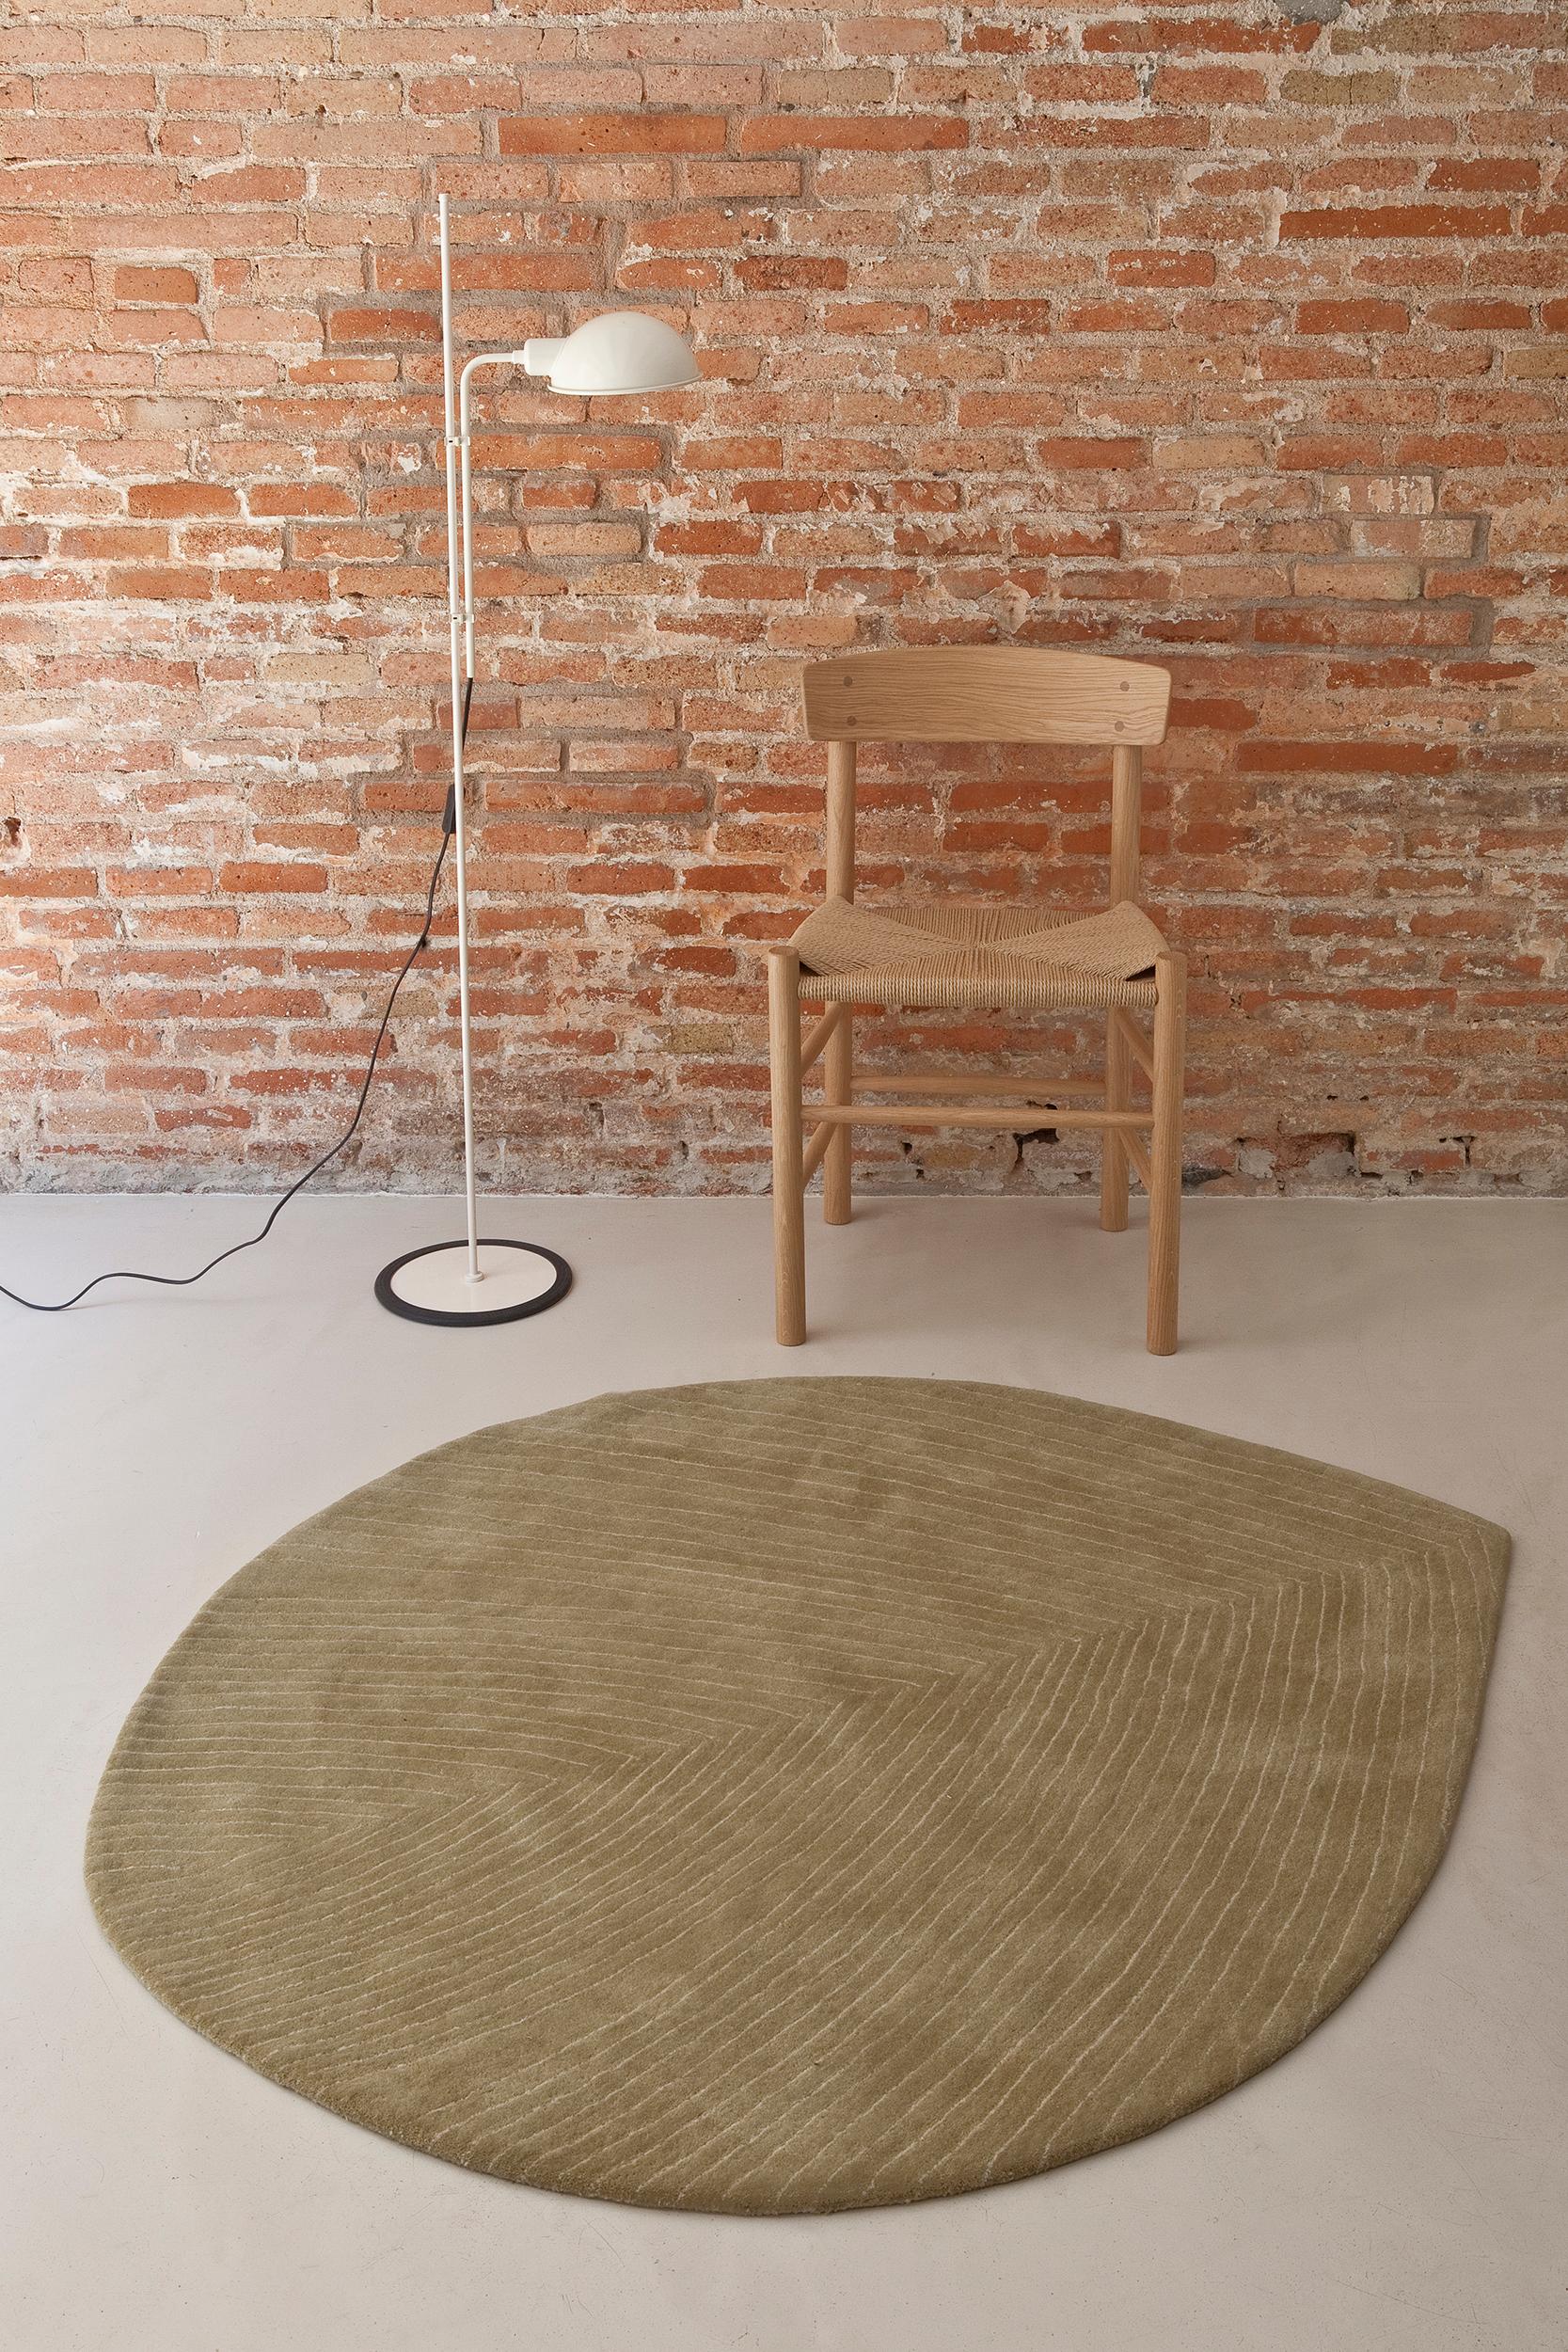 Contemporary Set of 3 'Quill' Rugs by Nao Tamura for Nanimarquina For Sale